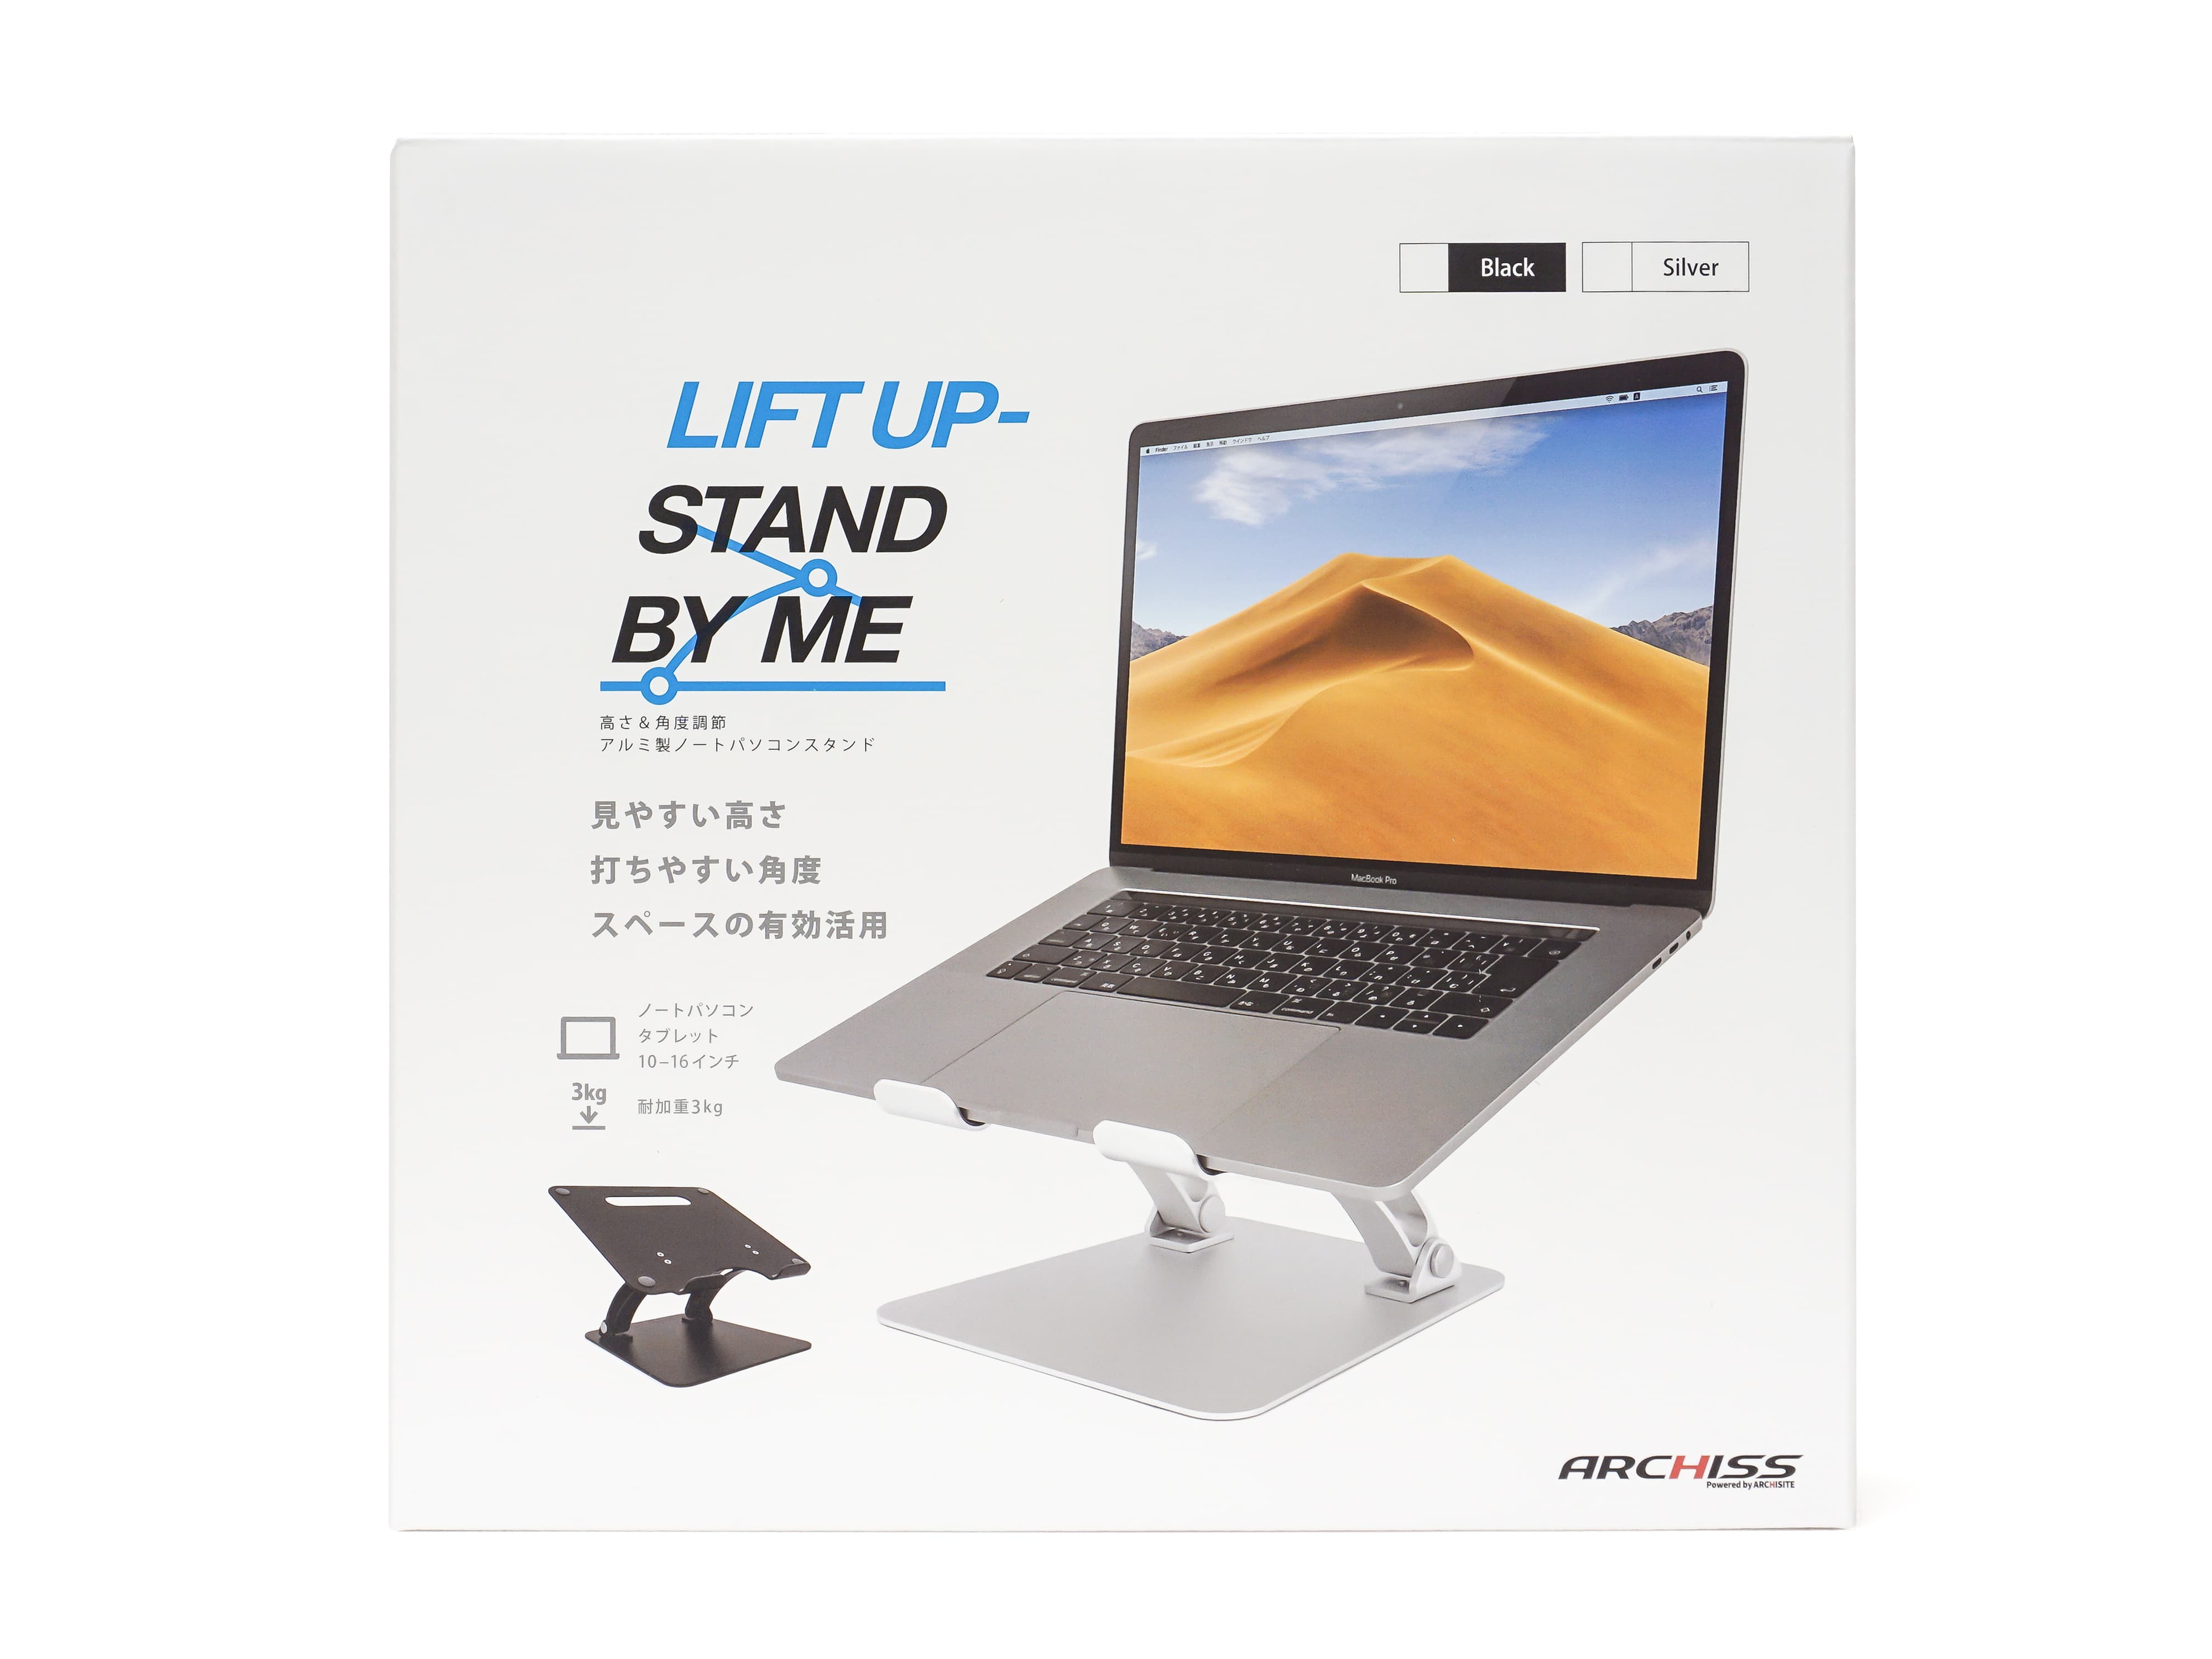 LIFT UP-STAND BY ME - ARCHISS - 株式会社アーキサイト